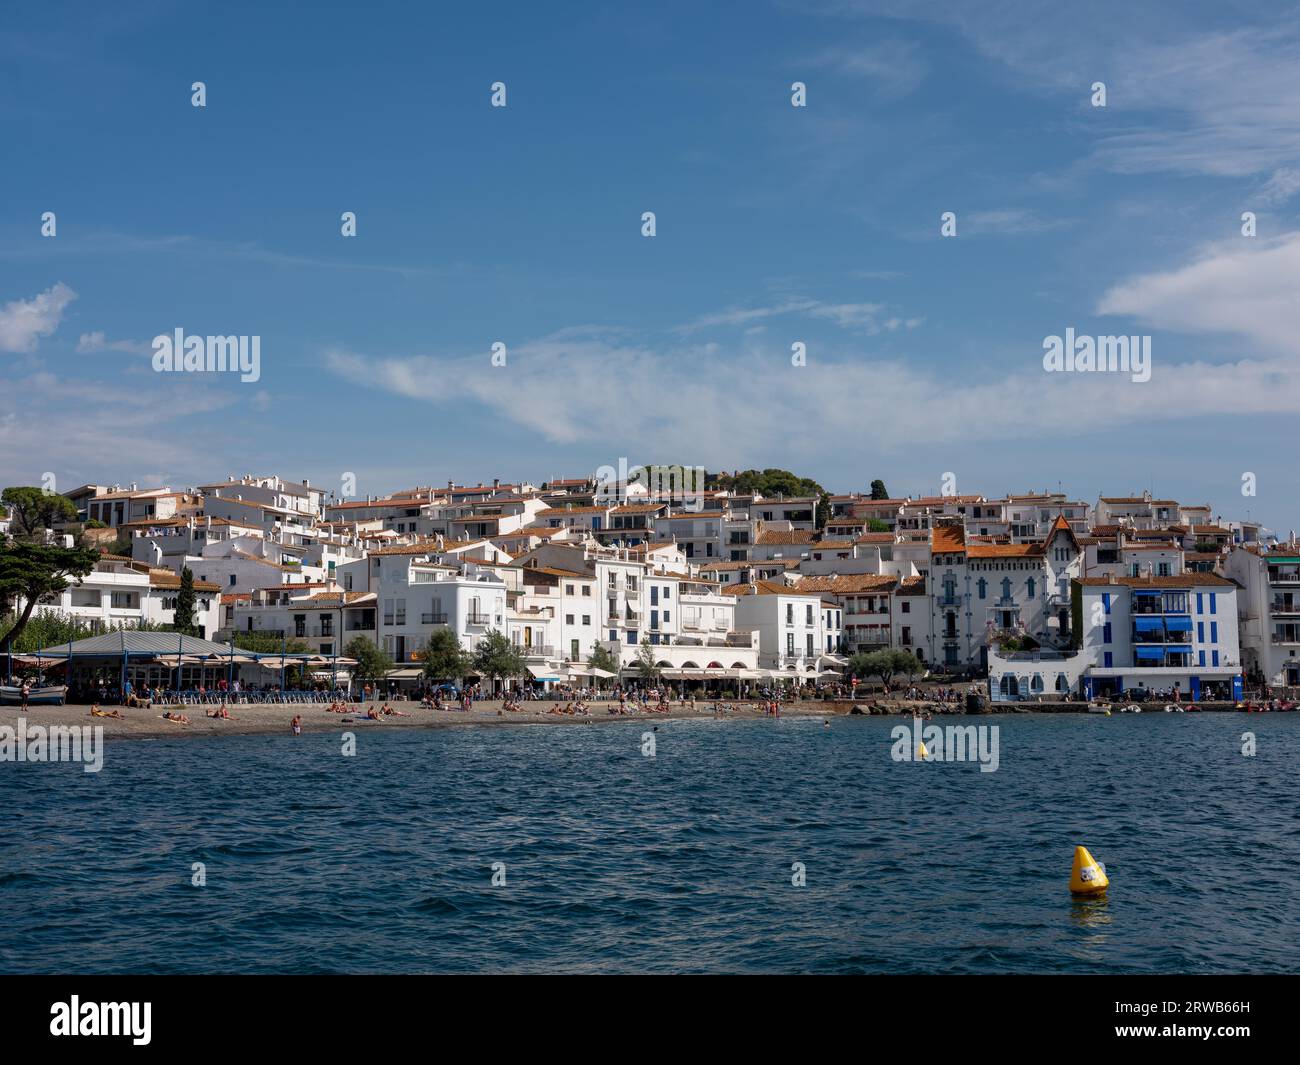 The town of Cadaques in Catalonia, Spain. Stock Photo